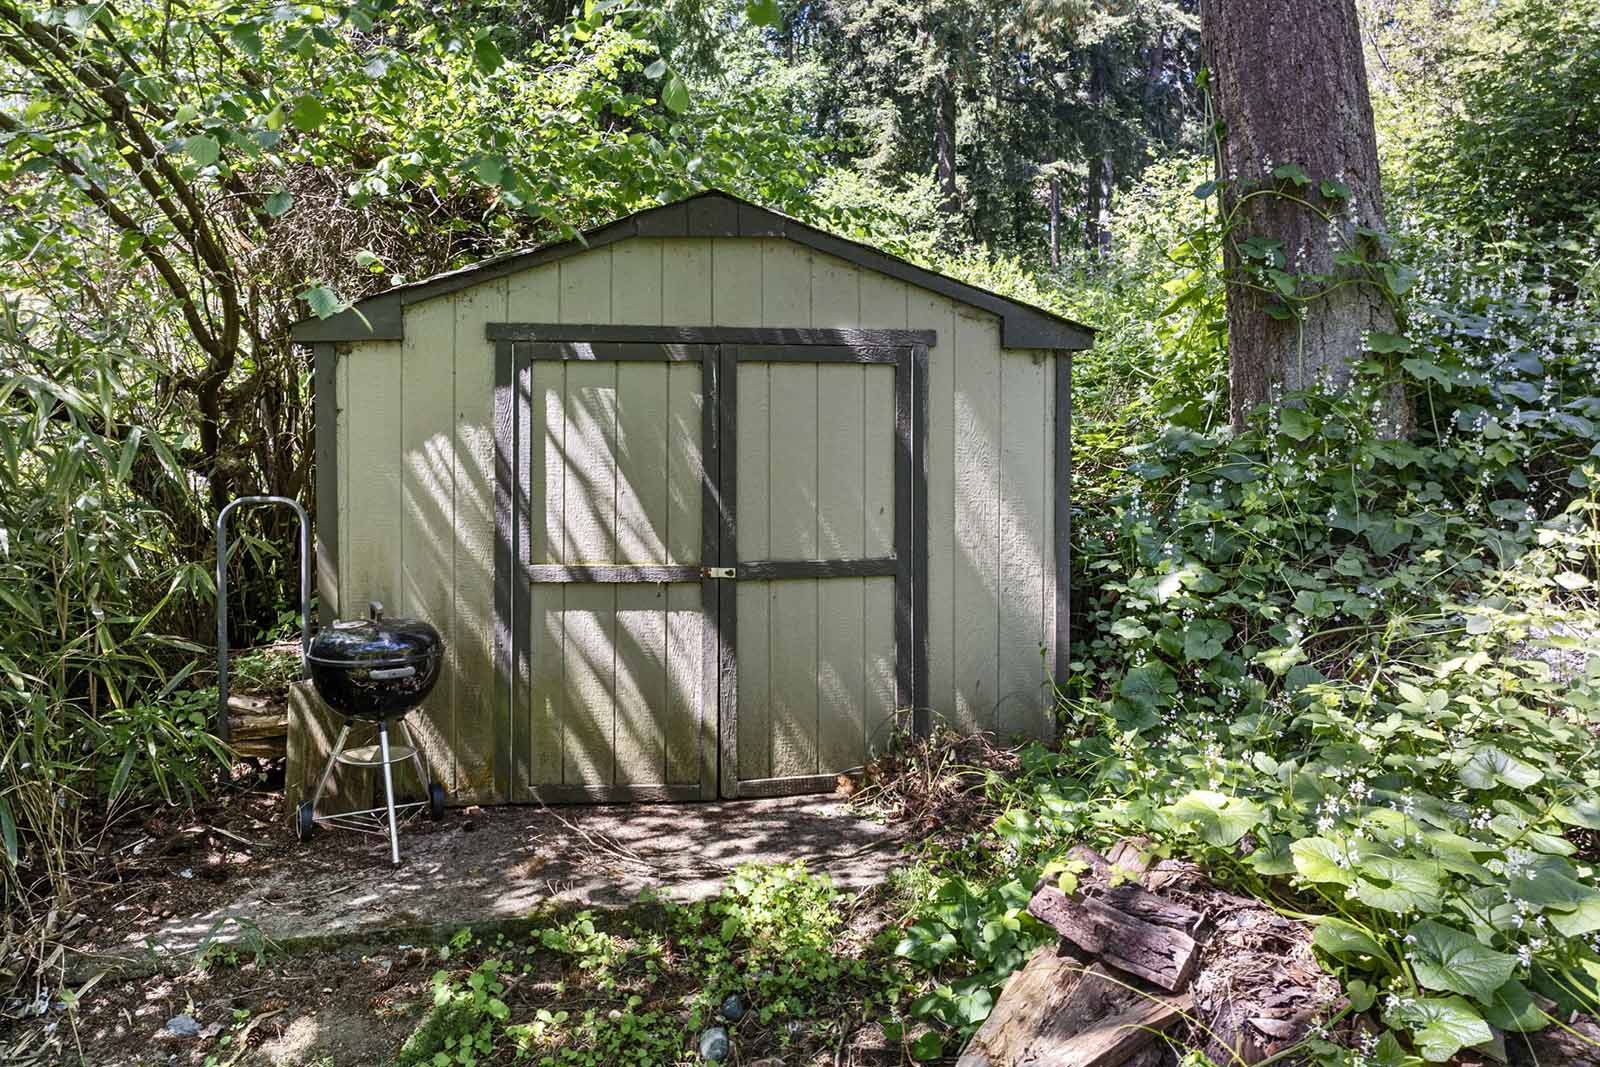 Utility shed in back yard for extra storage